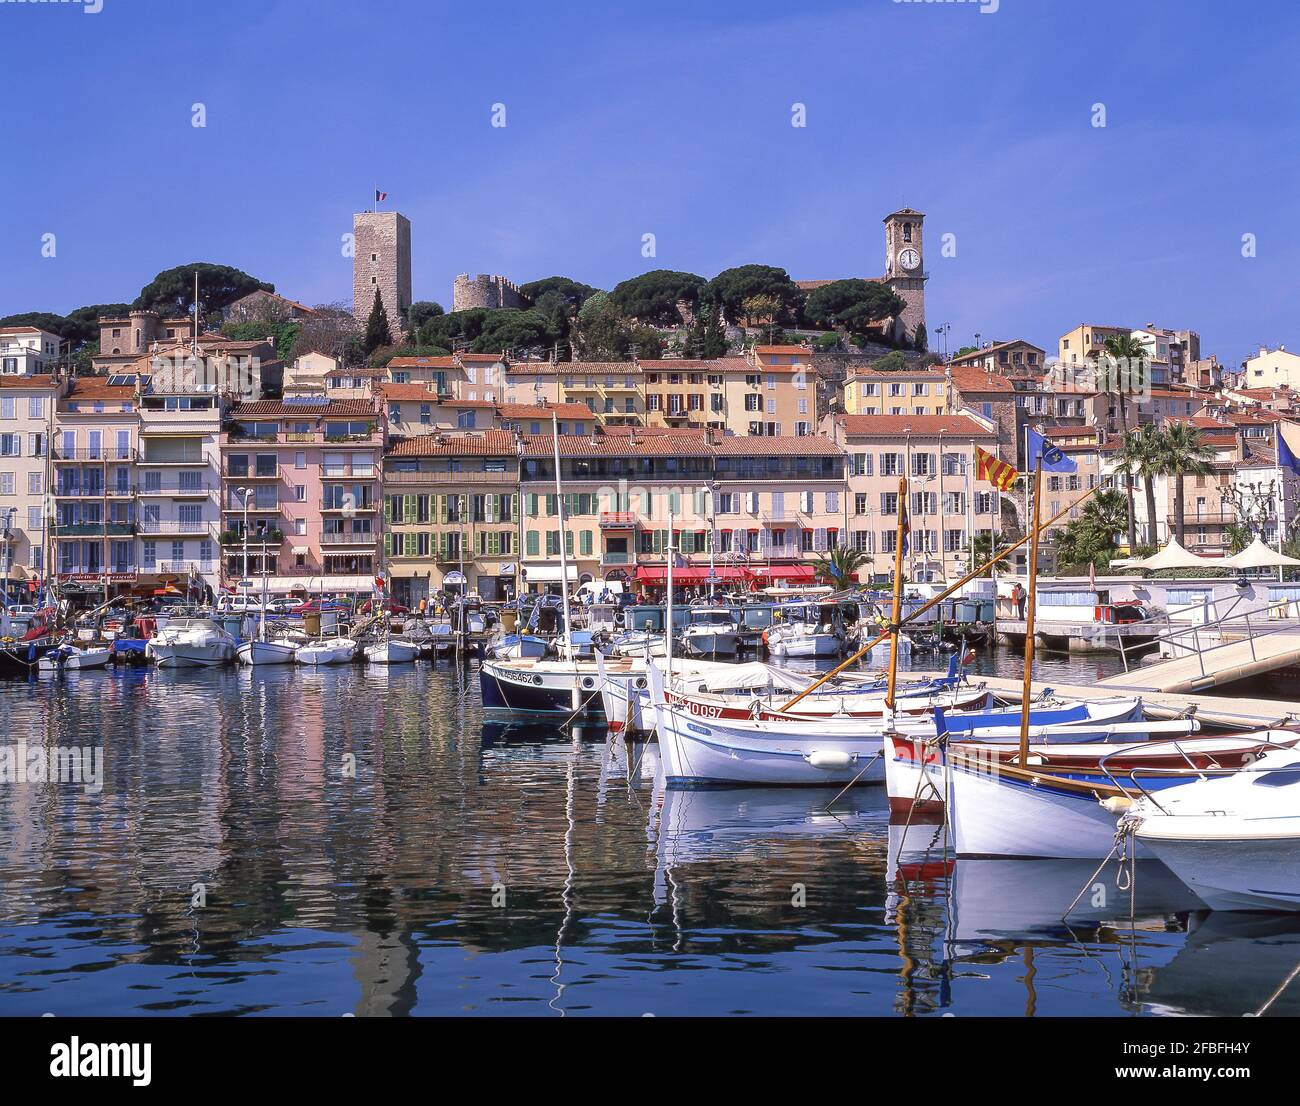 The bay of Cannes Wall Mural | Buy online at Abposters.com